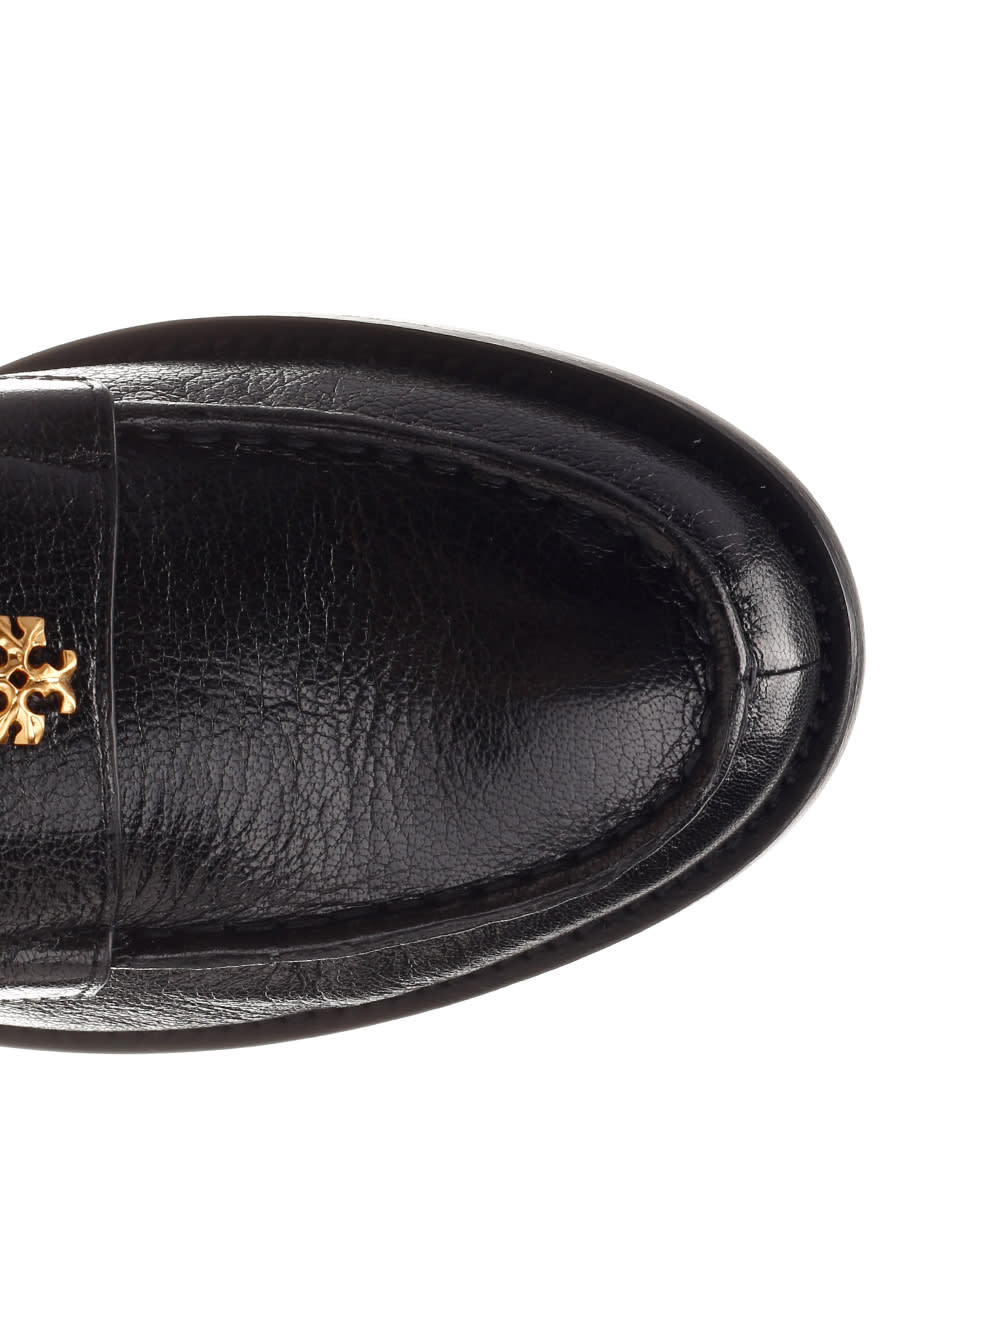 Shop Tory Burch Perry Loafer Flat Shoes In Black